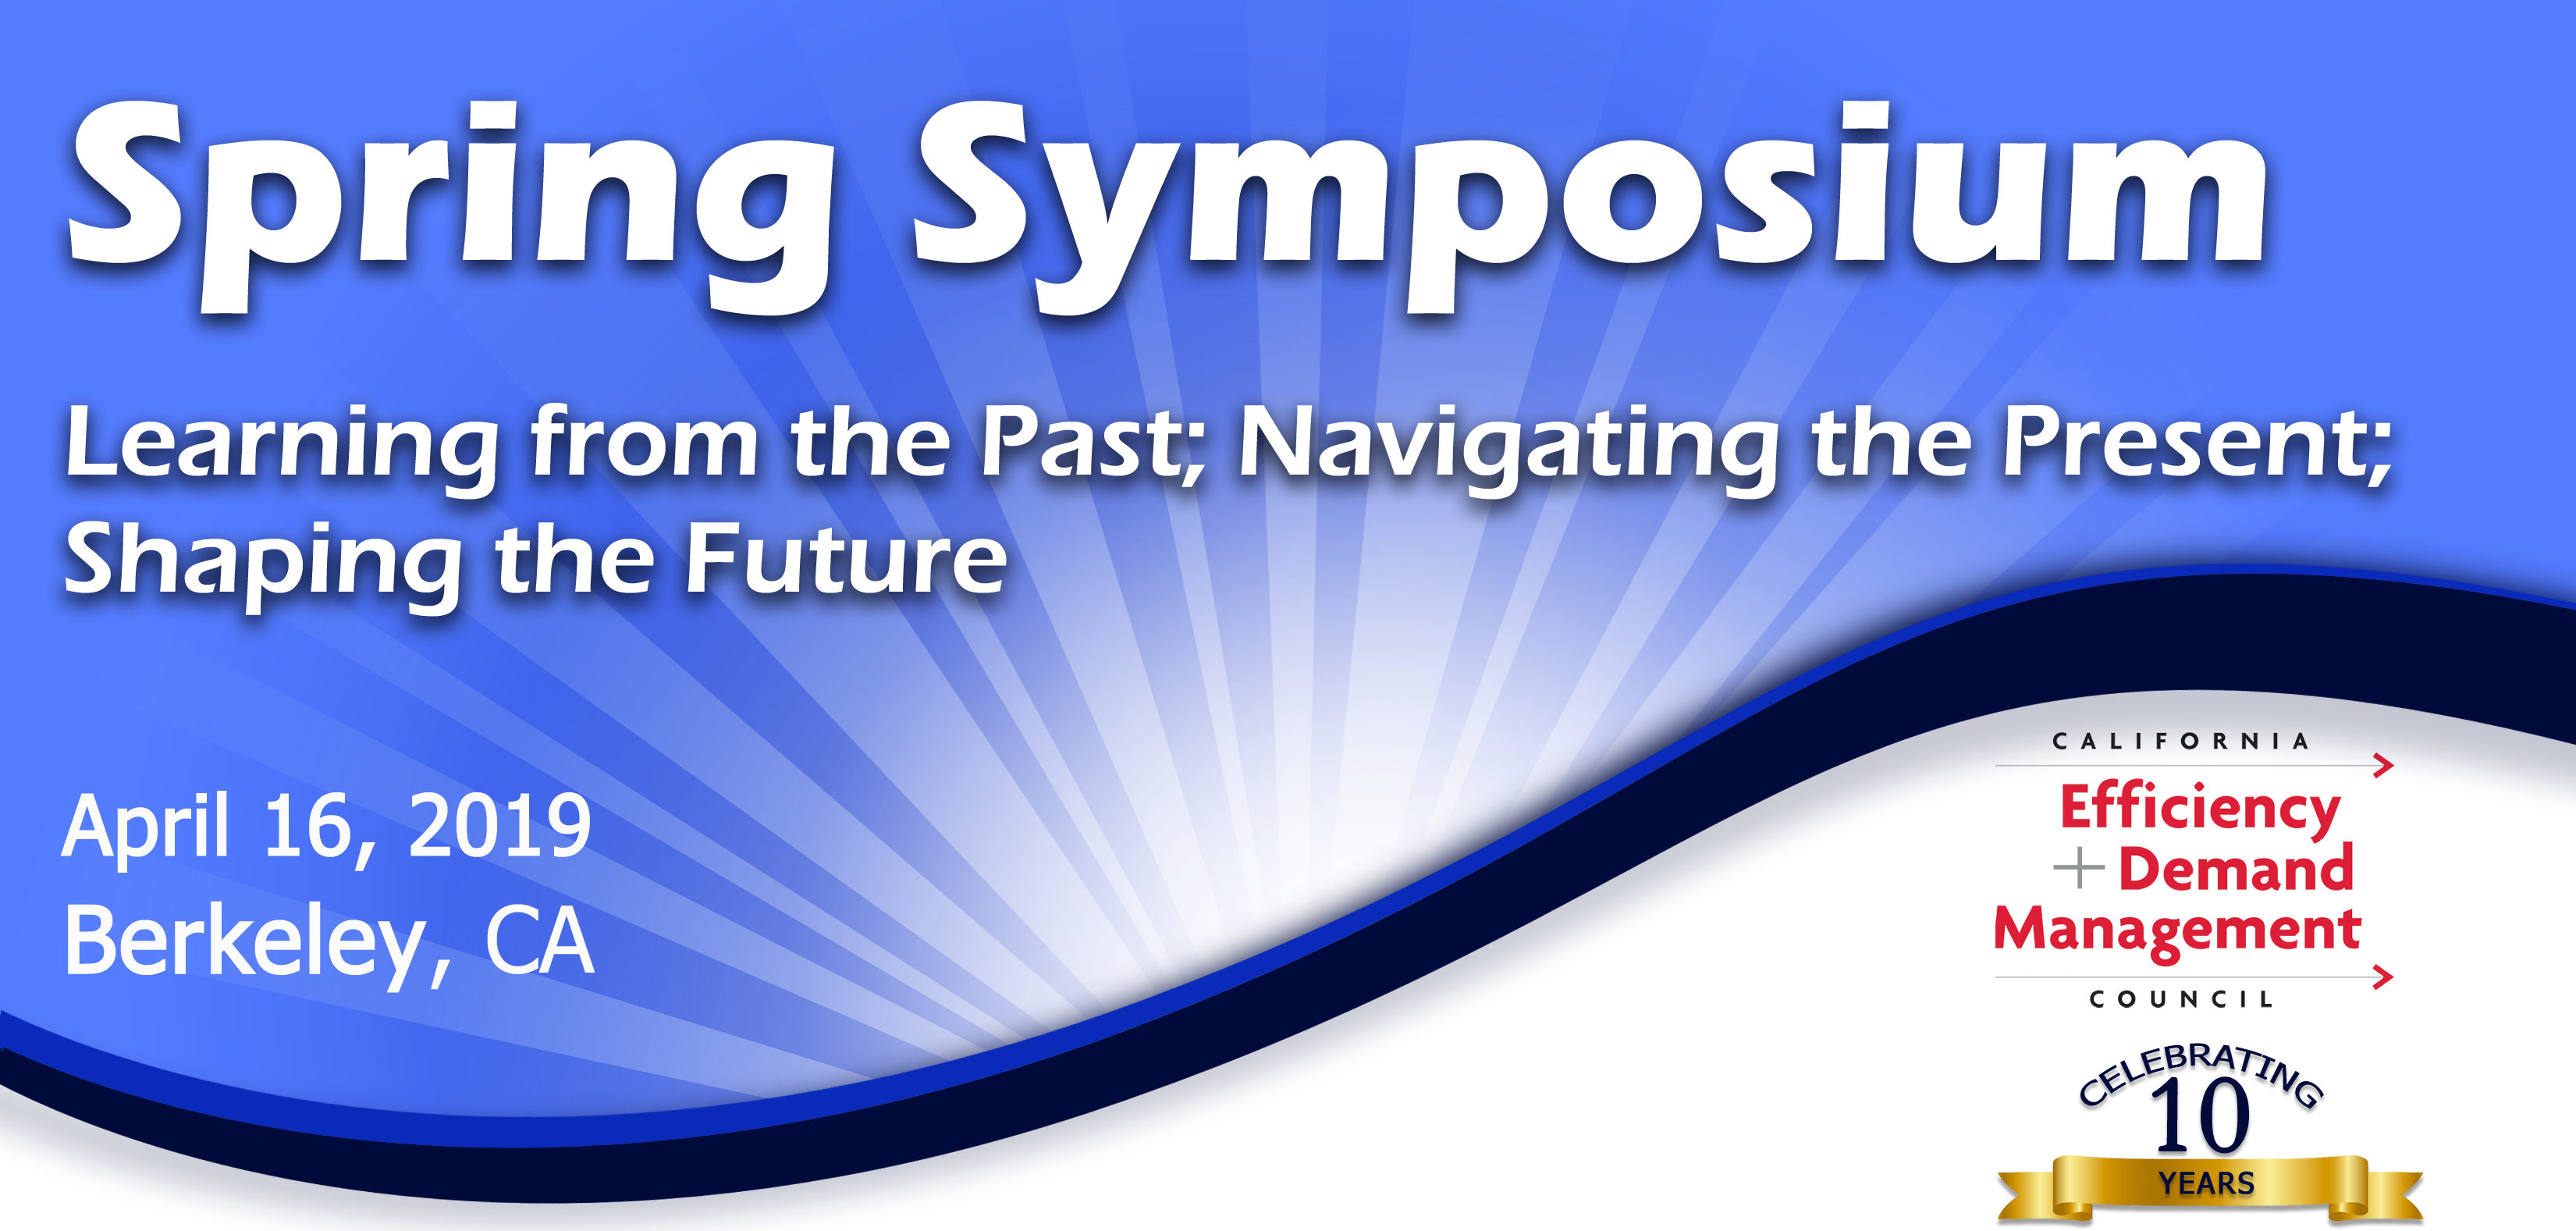 Spring Symposium Learning from the Past; Navigating the Present